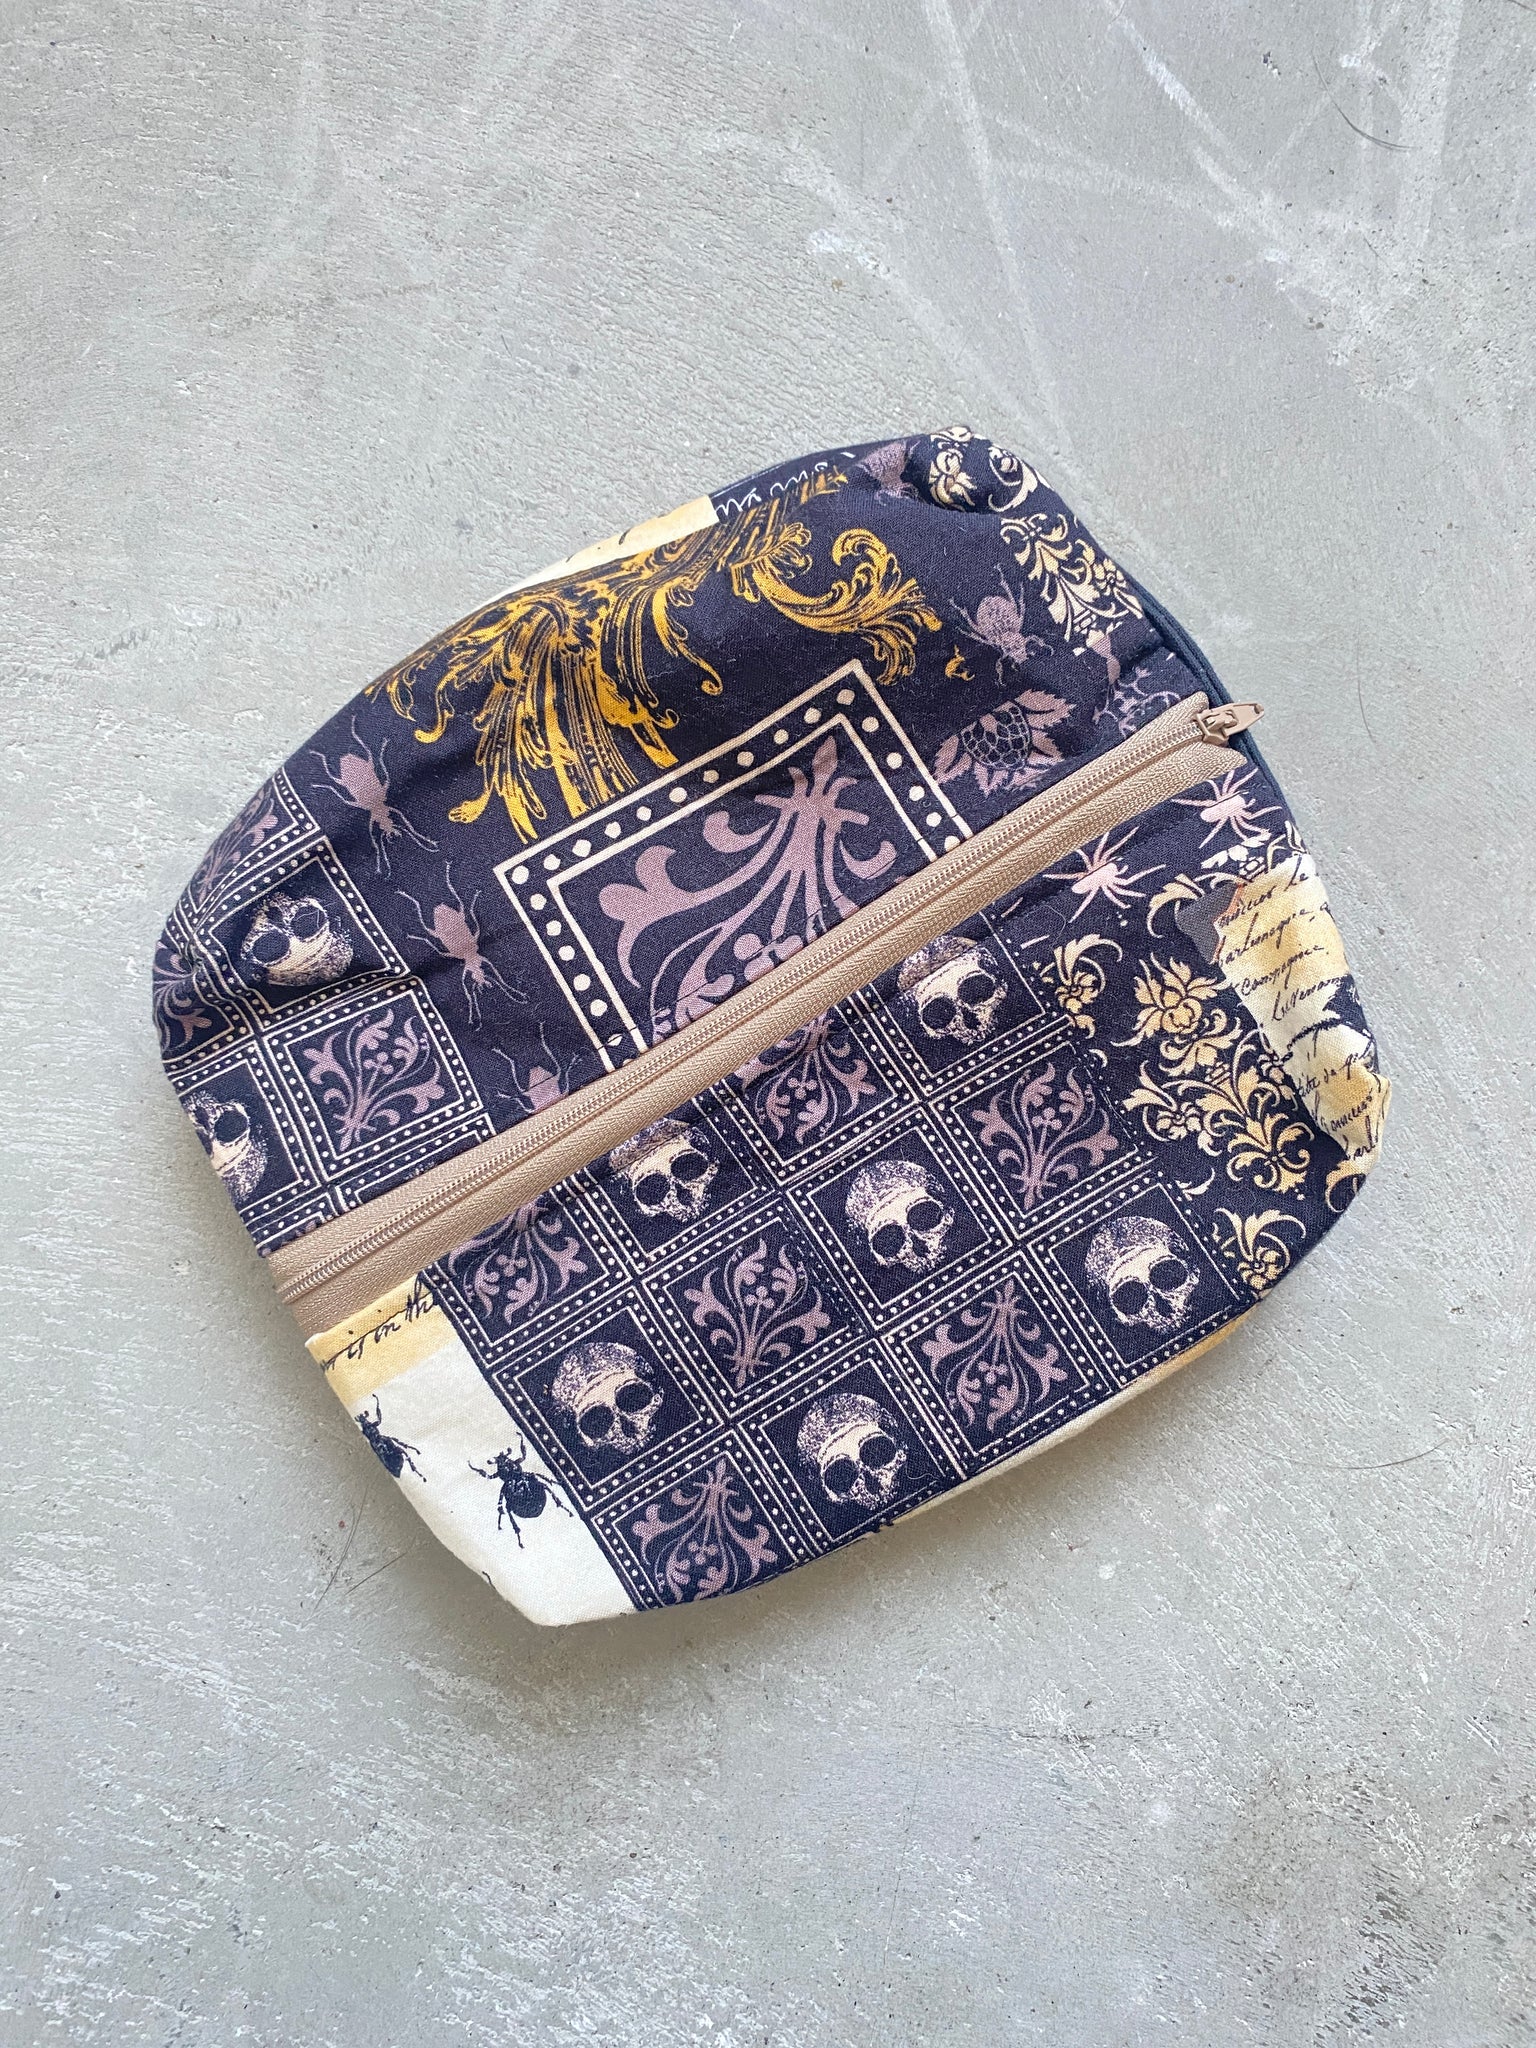 Handmade Black Skull and Crow Patterned Zipper Pouch